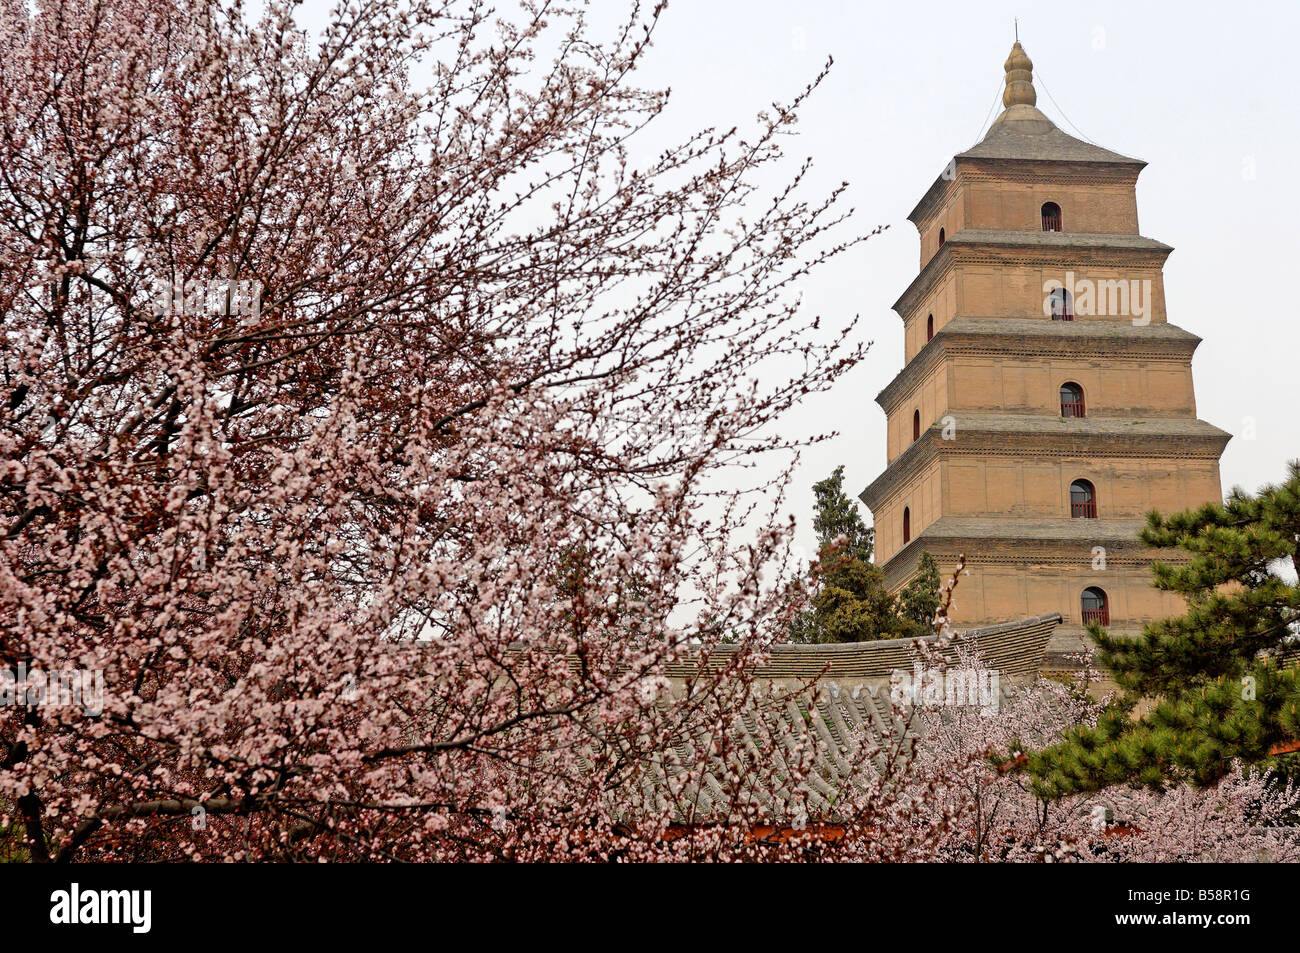 Great Wild Goose Pagoda (Dayanta) built during the Tang Dynasty in the 7th century, Xian, Shaanxi, China Stock Photo